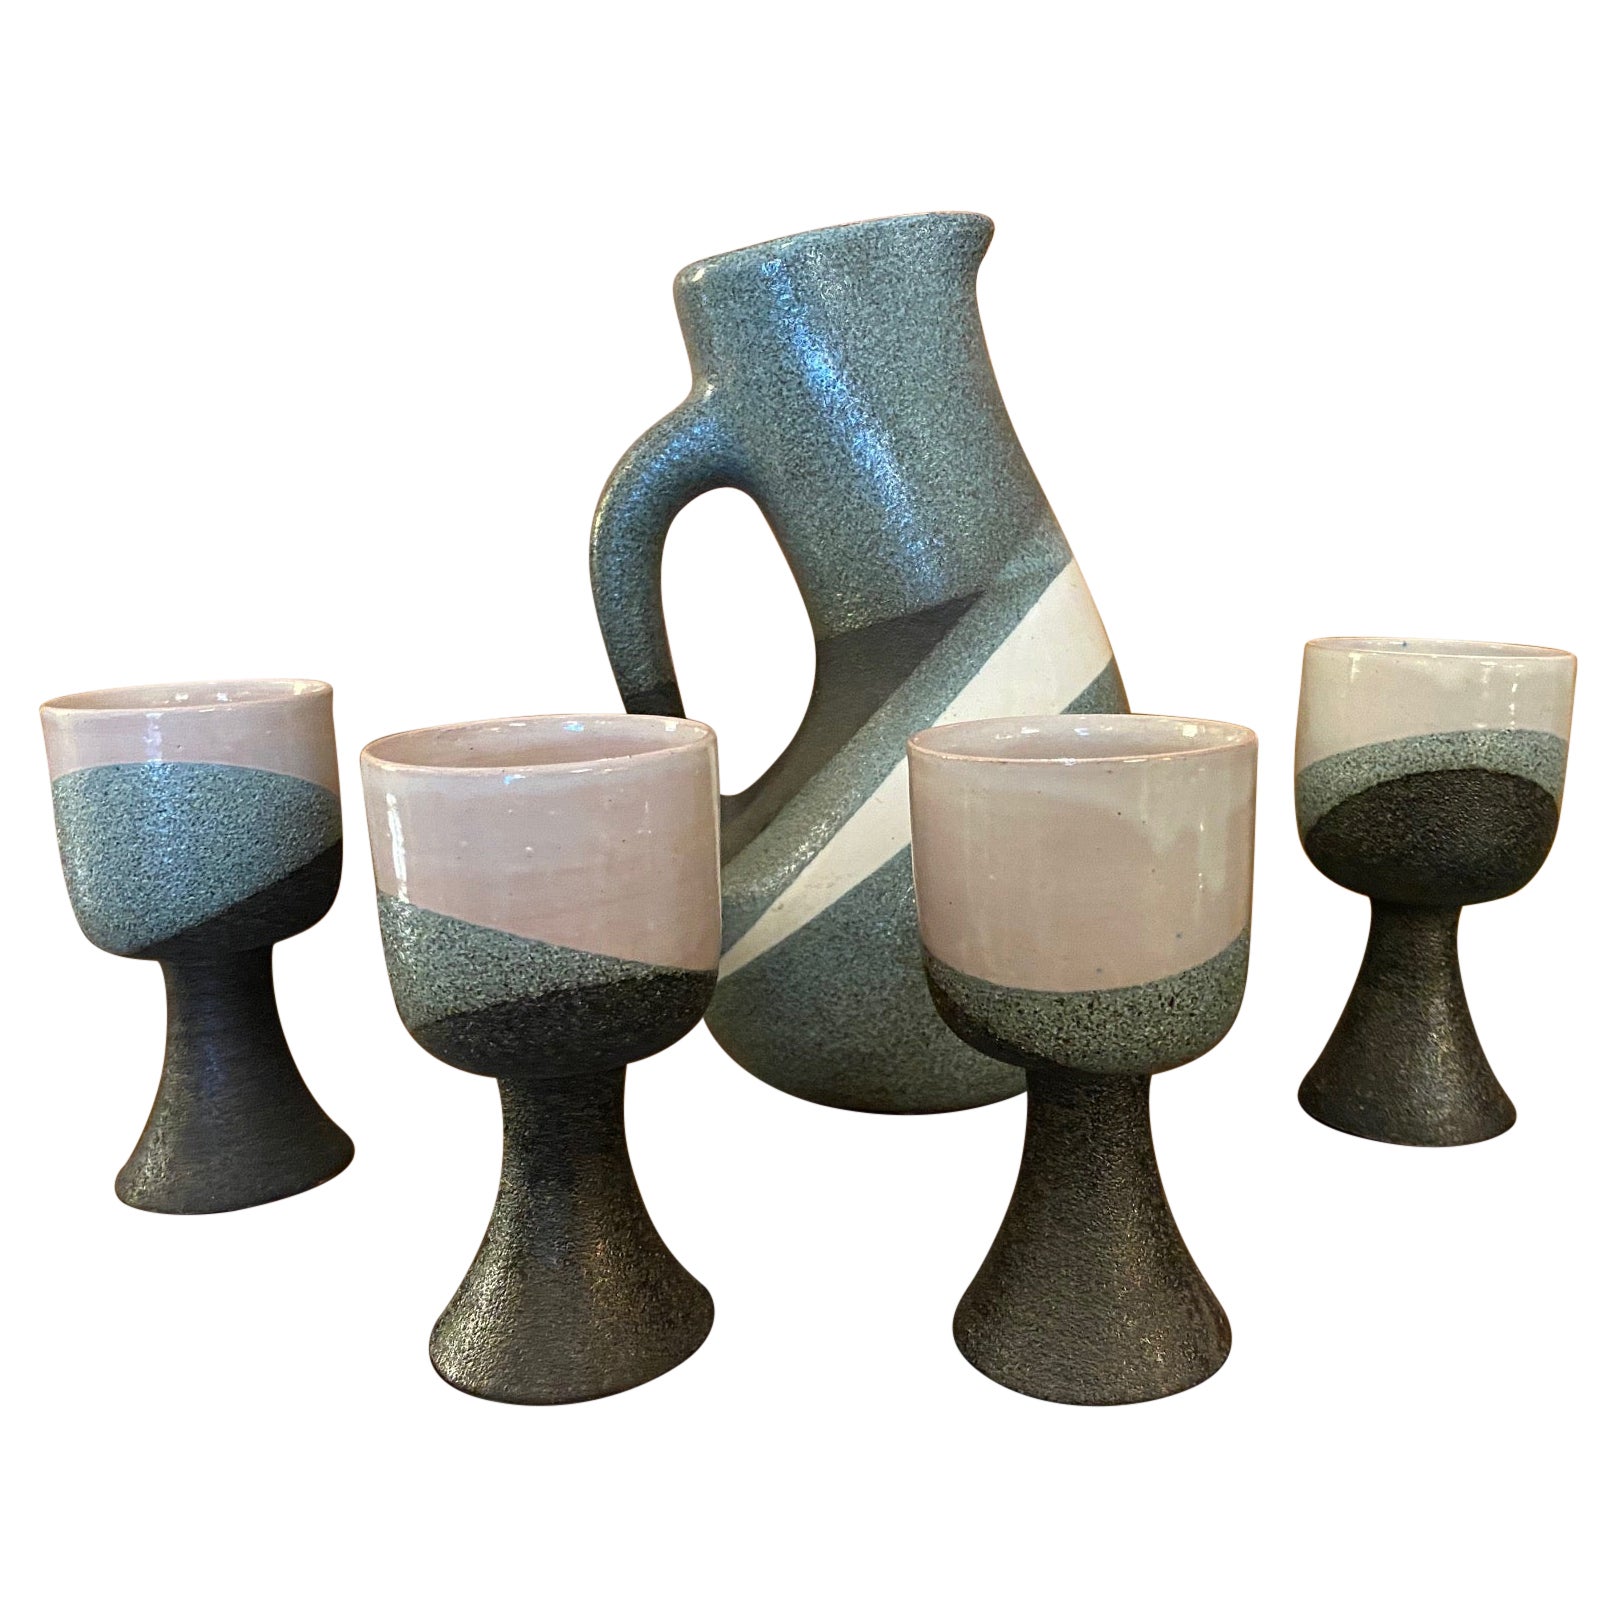 Ceramic Jug and Set of Four Cups by Gilbert Valentin, France, 1950s For Sale